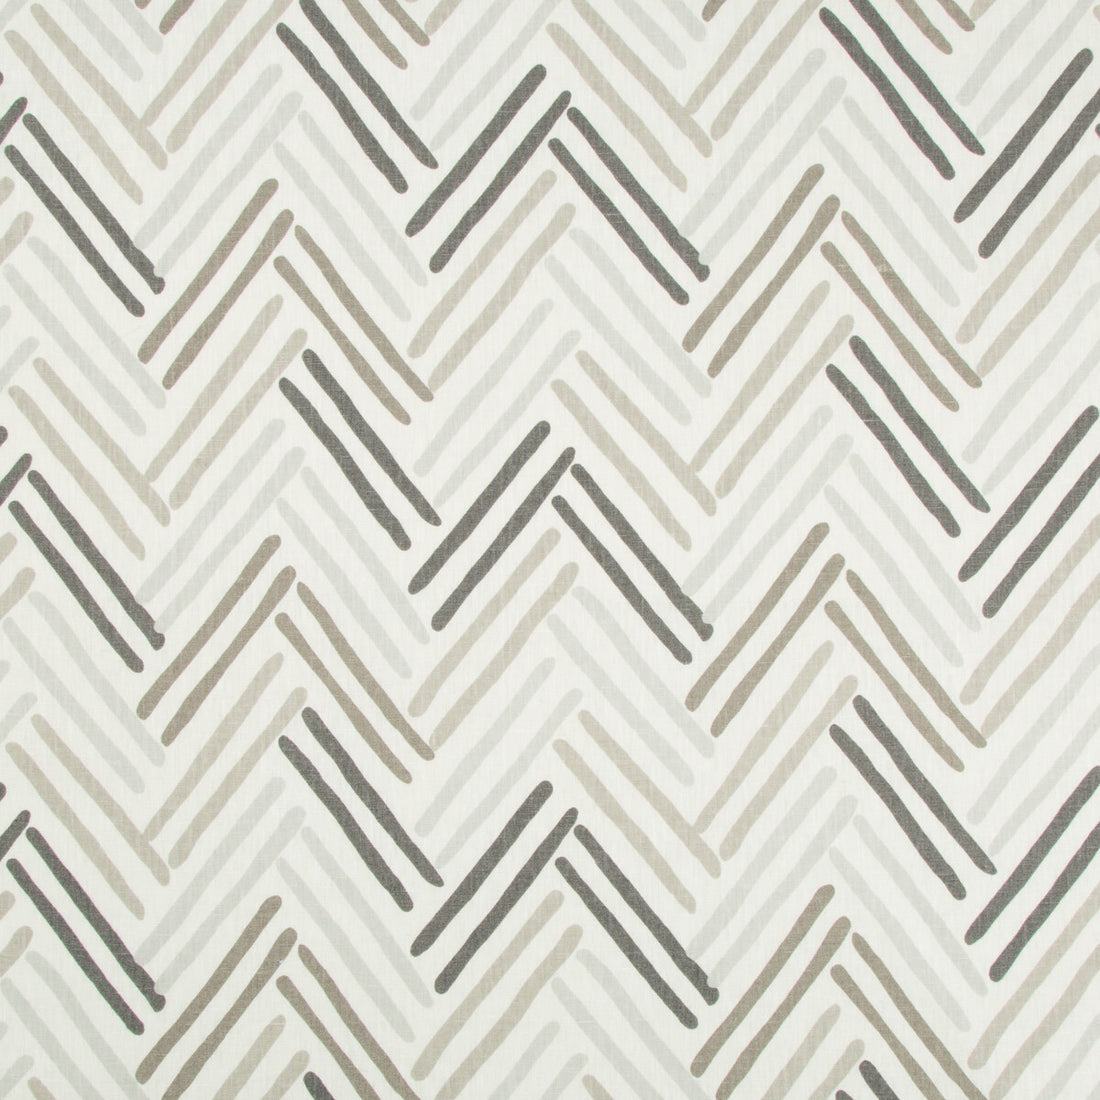 Fleet fabric in stone color - pattern FLEET.1611.0 - by Kravet Basics in the Thom Filicia Altitude collection